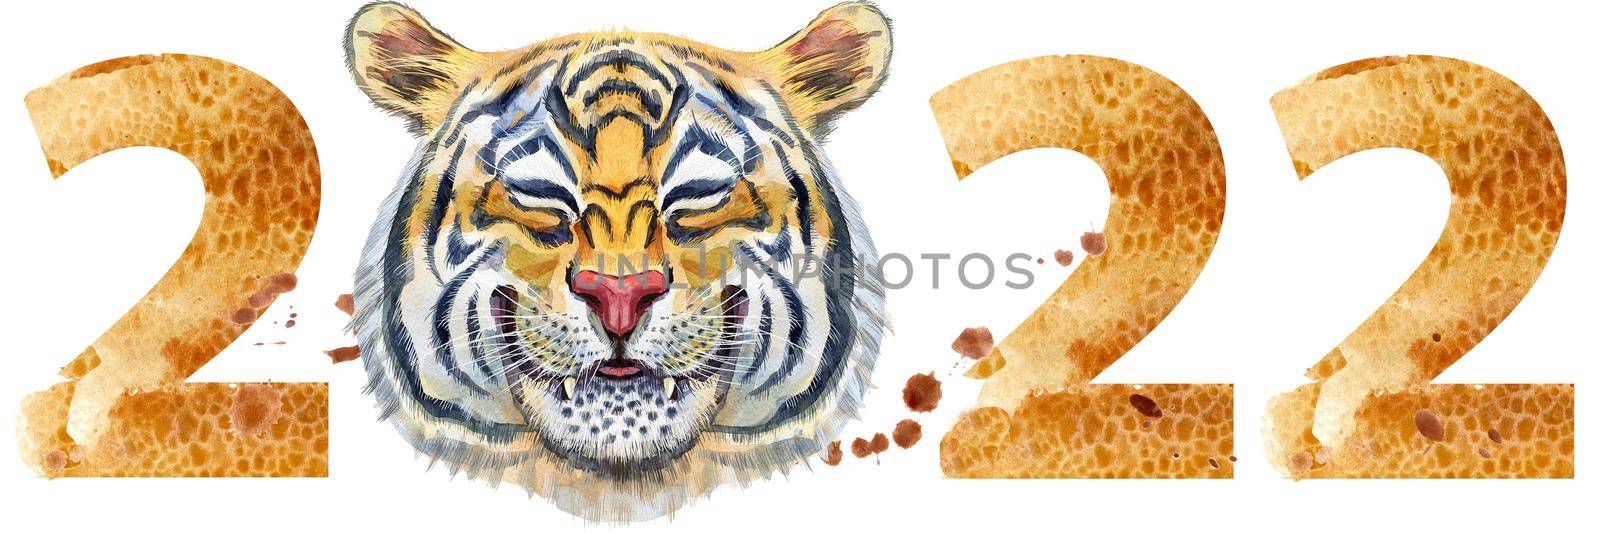 Watercolor illustration new year two thousand and twenty two with tiger head by NataOmsk